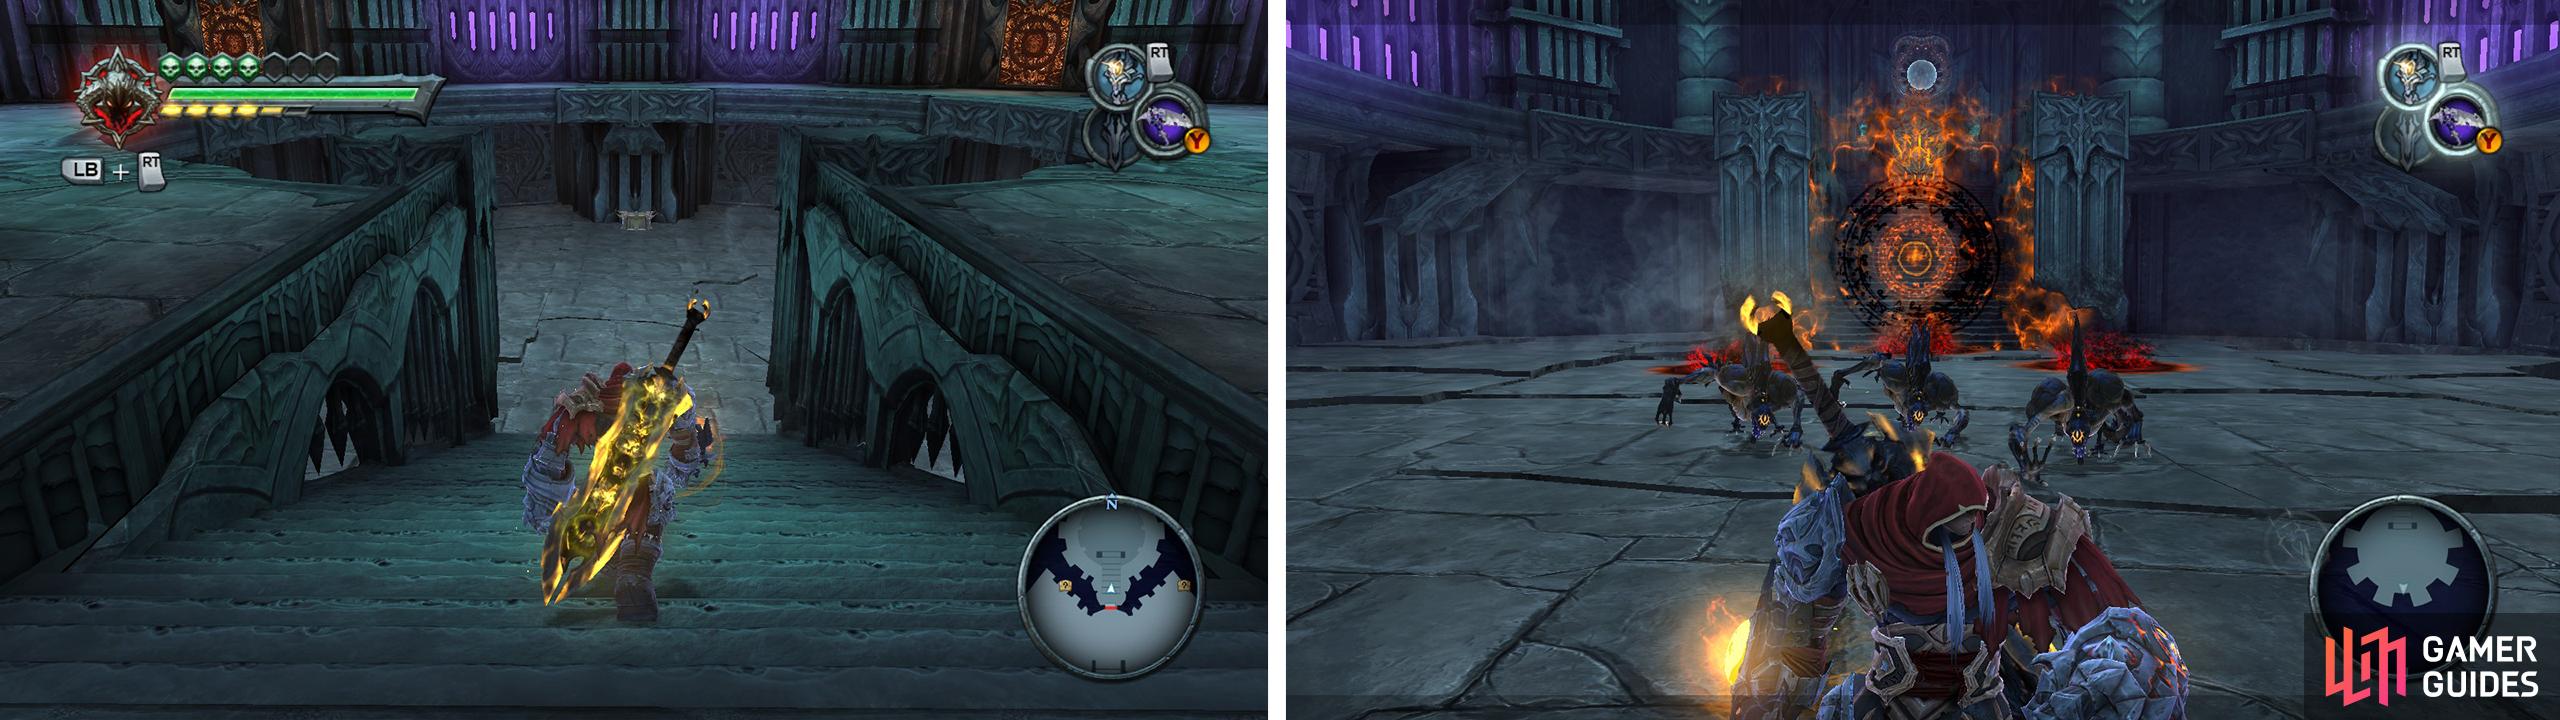 Open the chest (left) to trigger waves of enemies to kill (right).